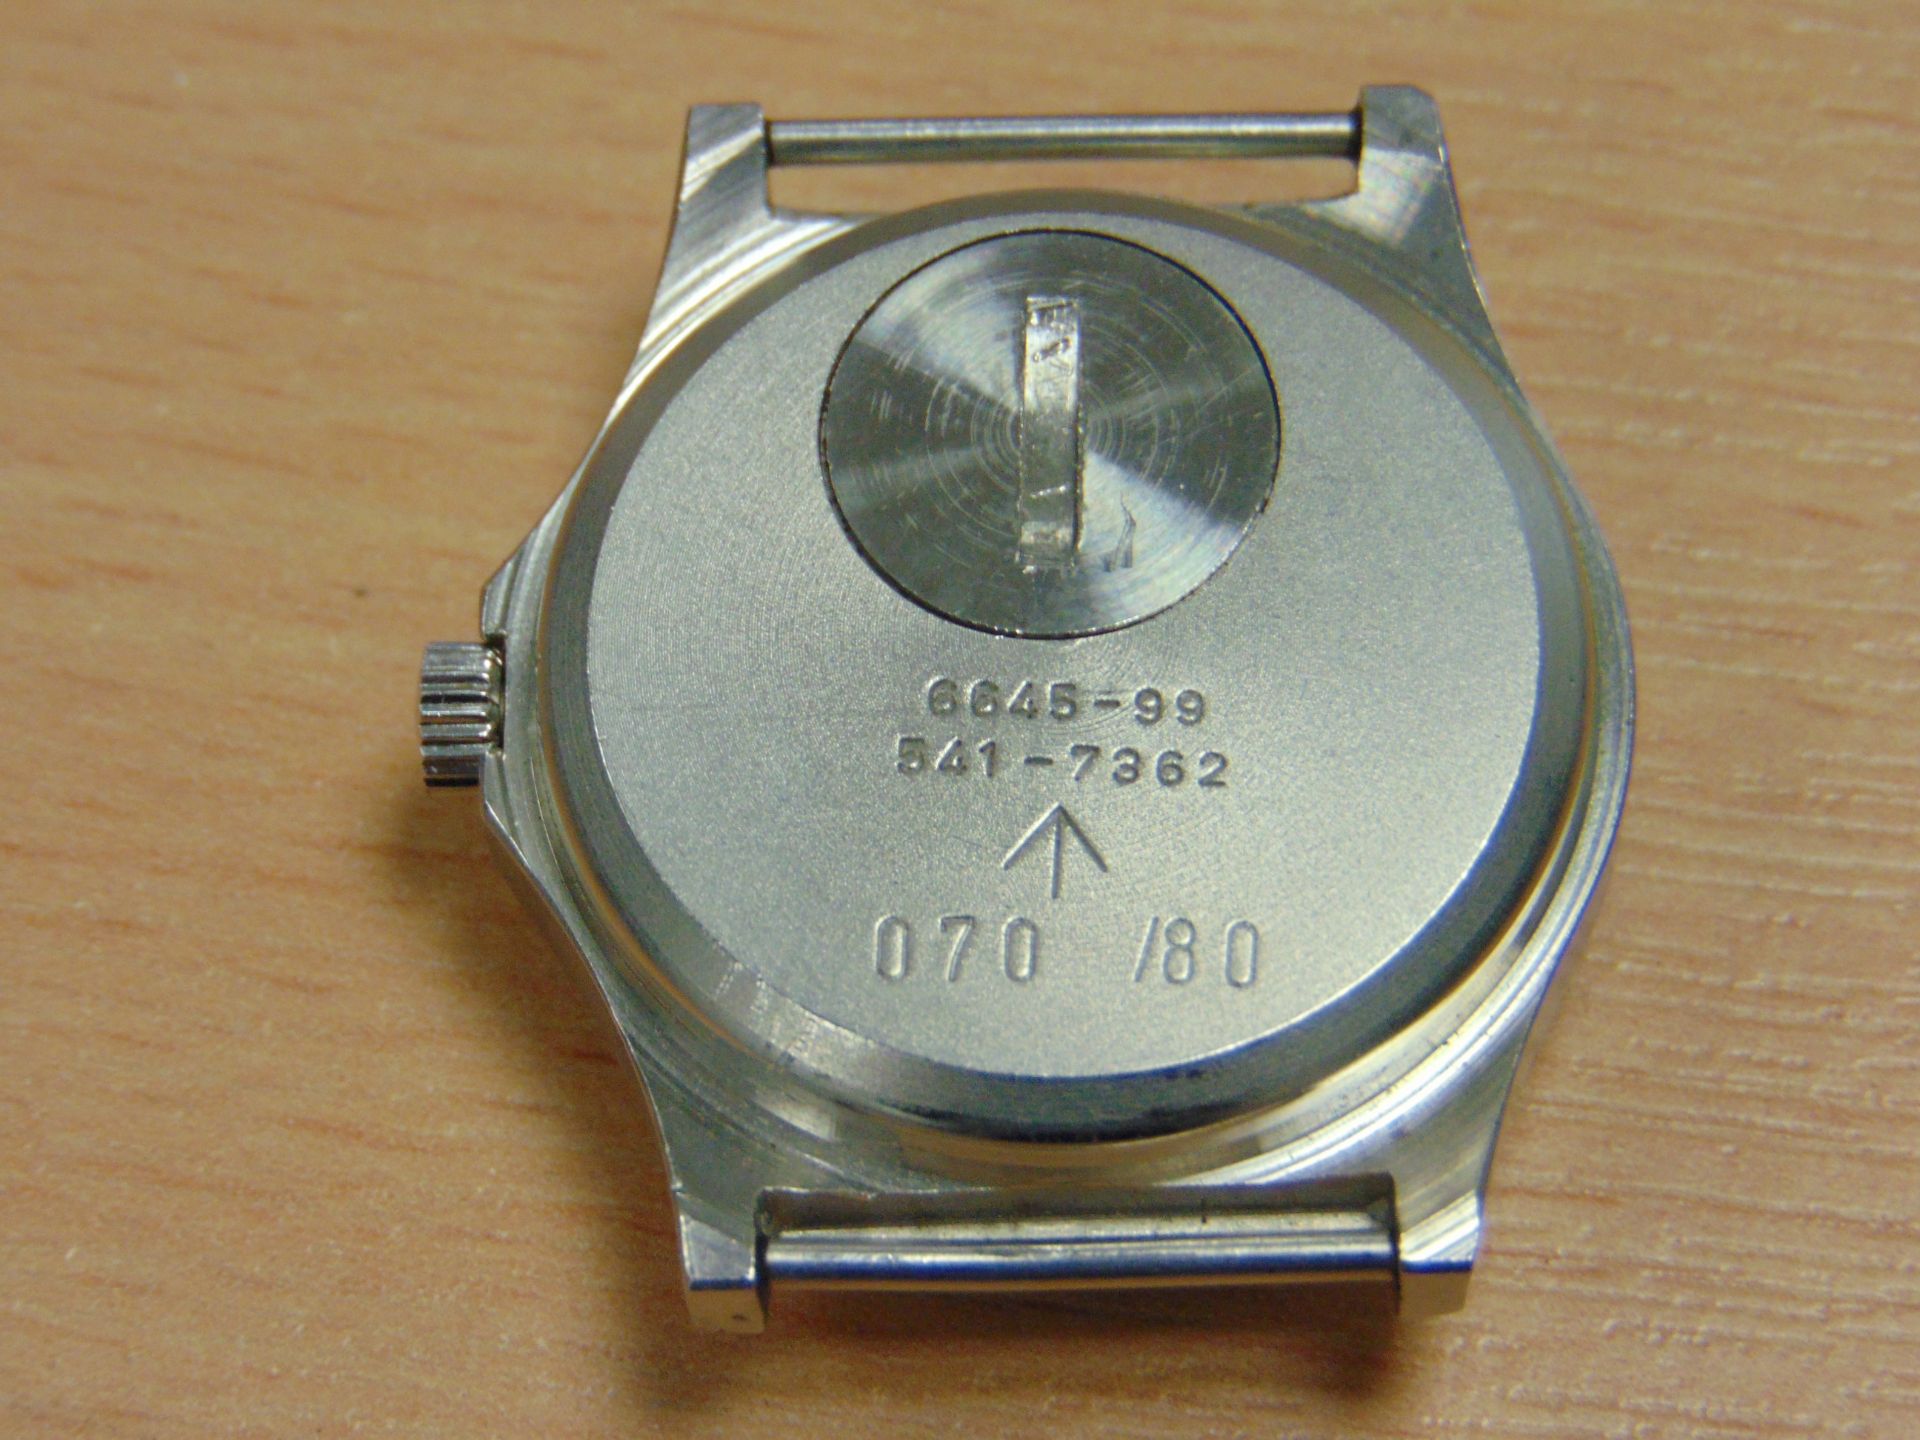 CWC FAT BOY QUARTZ 070 SERVICE WATCH. Rare Model Nato Marked and dated 1980 - PRE FALKLANDS WAR - Image 4 of 8